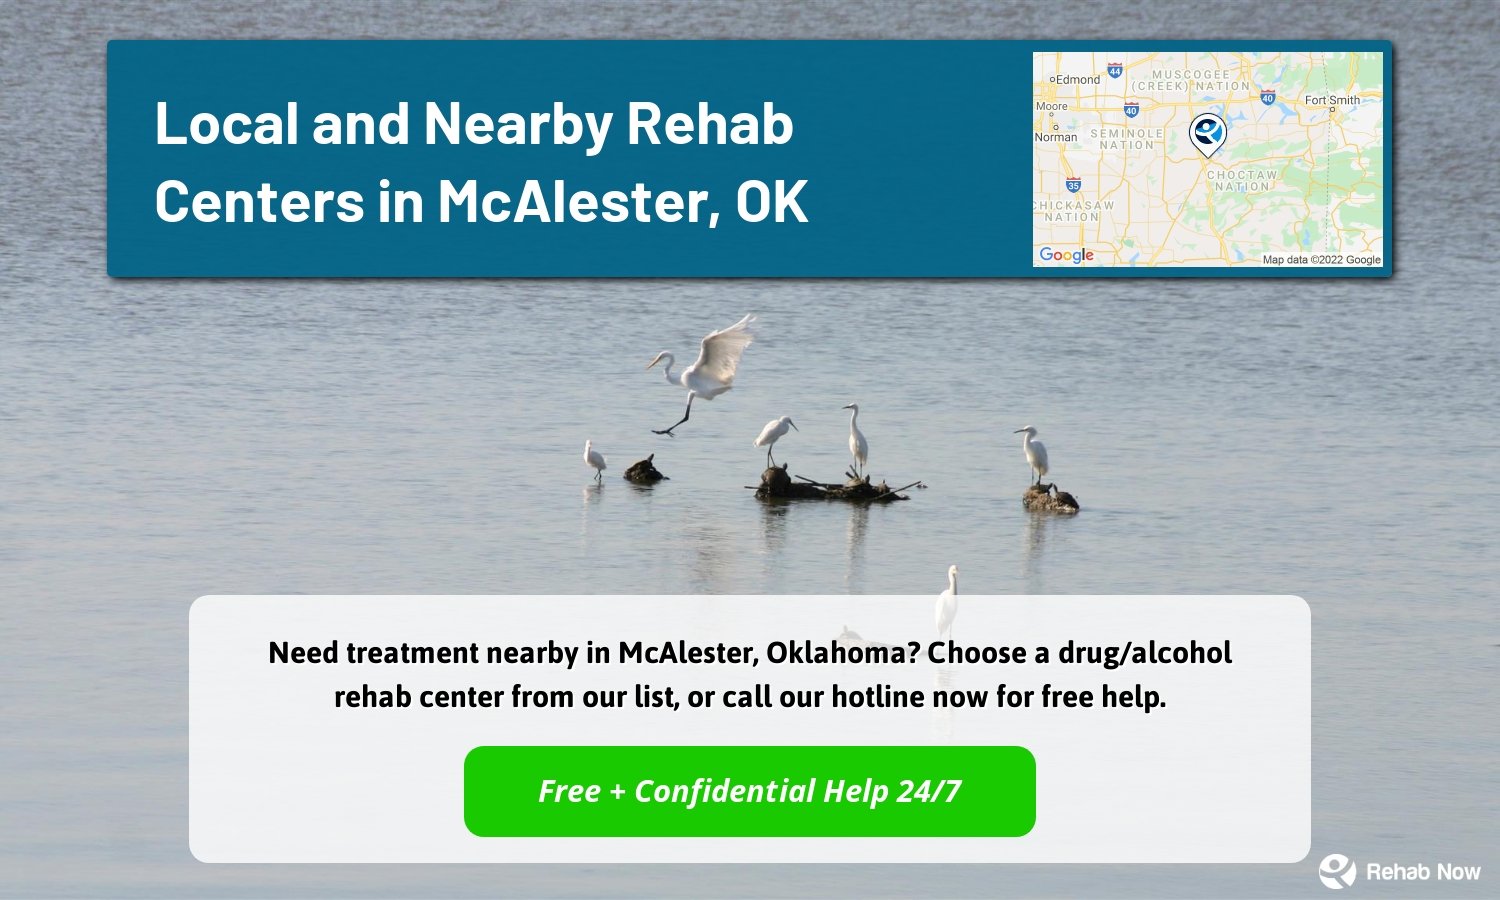 Need treatment nearby in McAlester, Oklahoma? Choose a drug/alcohol rehab center from our list, or call our hotline now for free help.